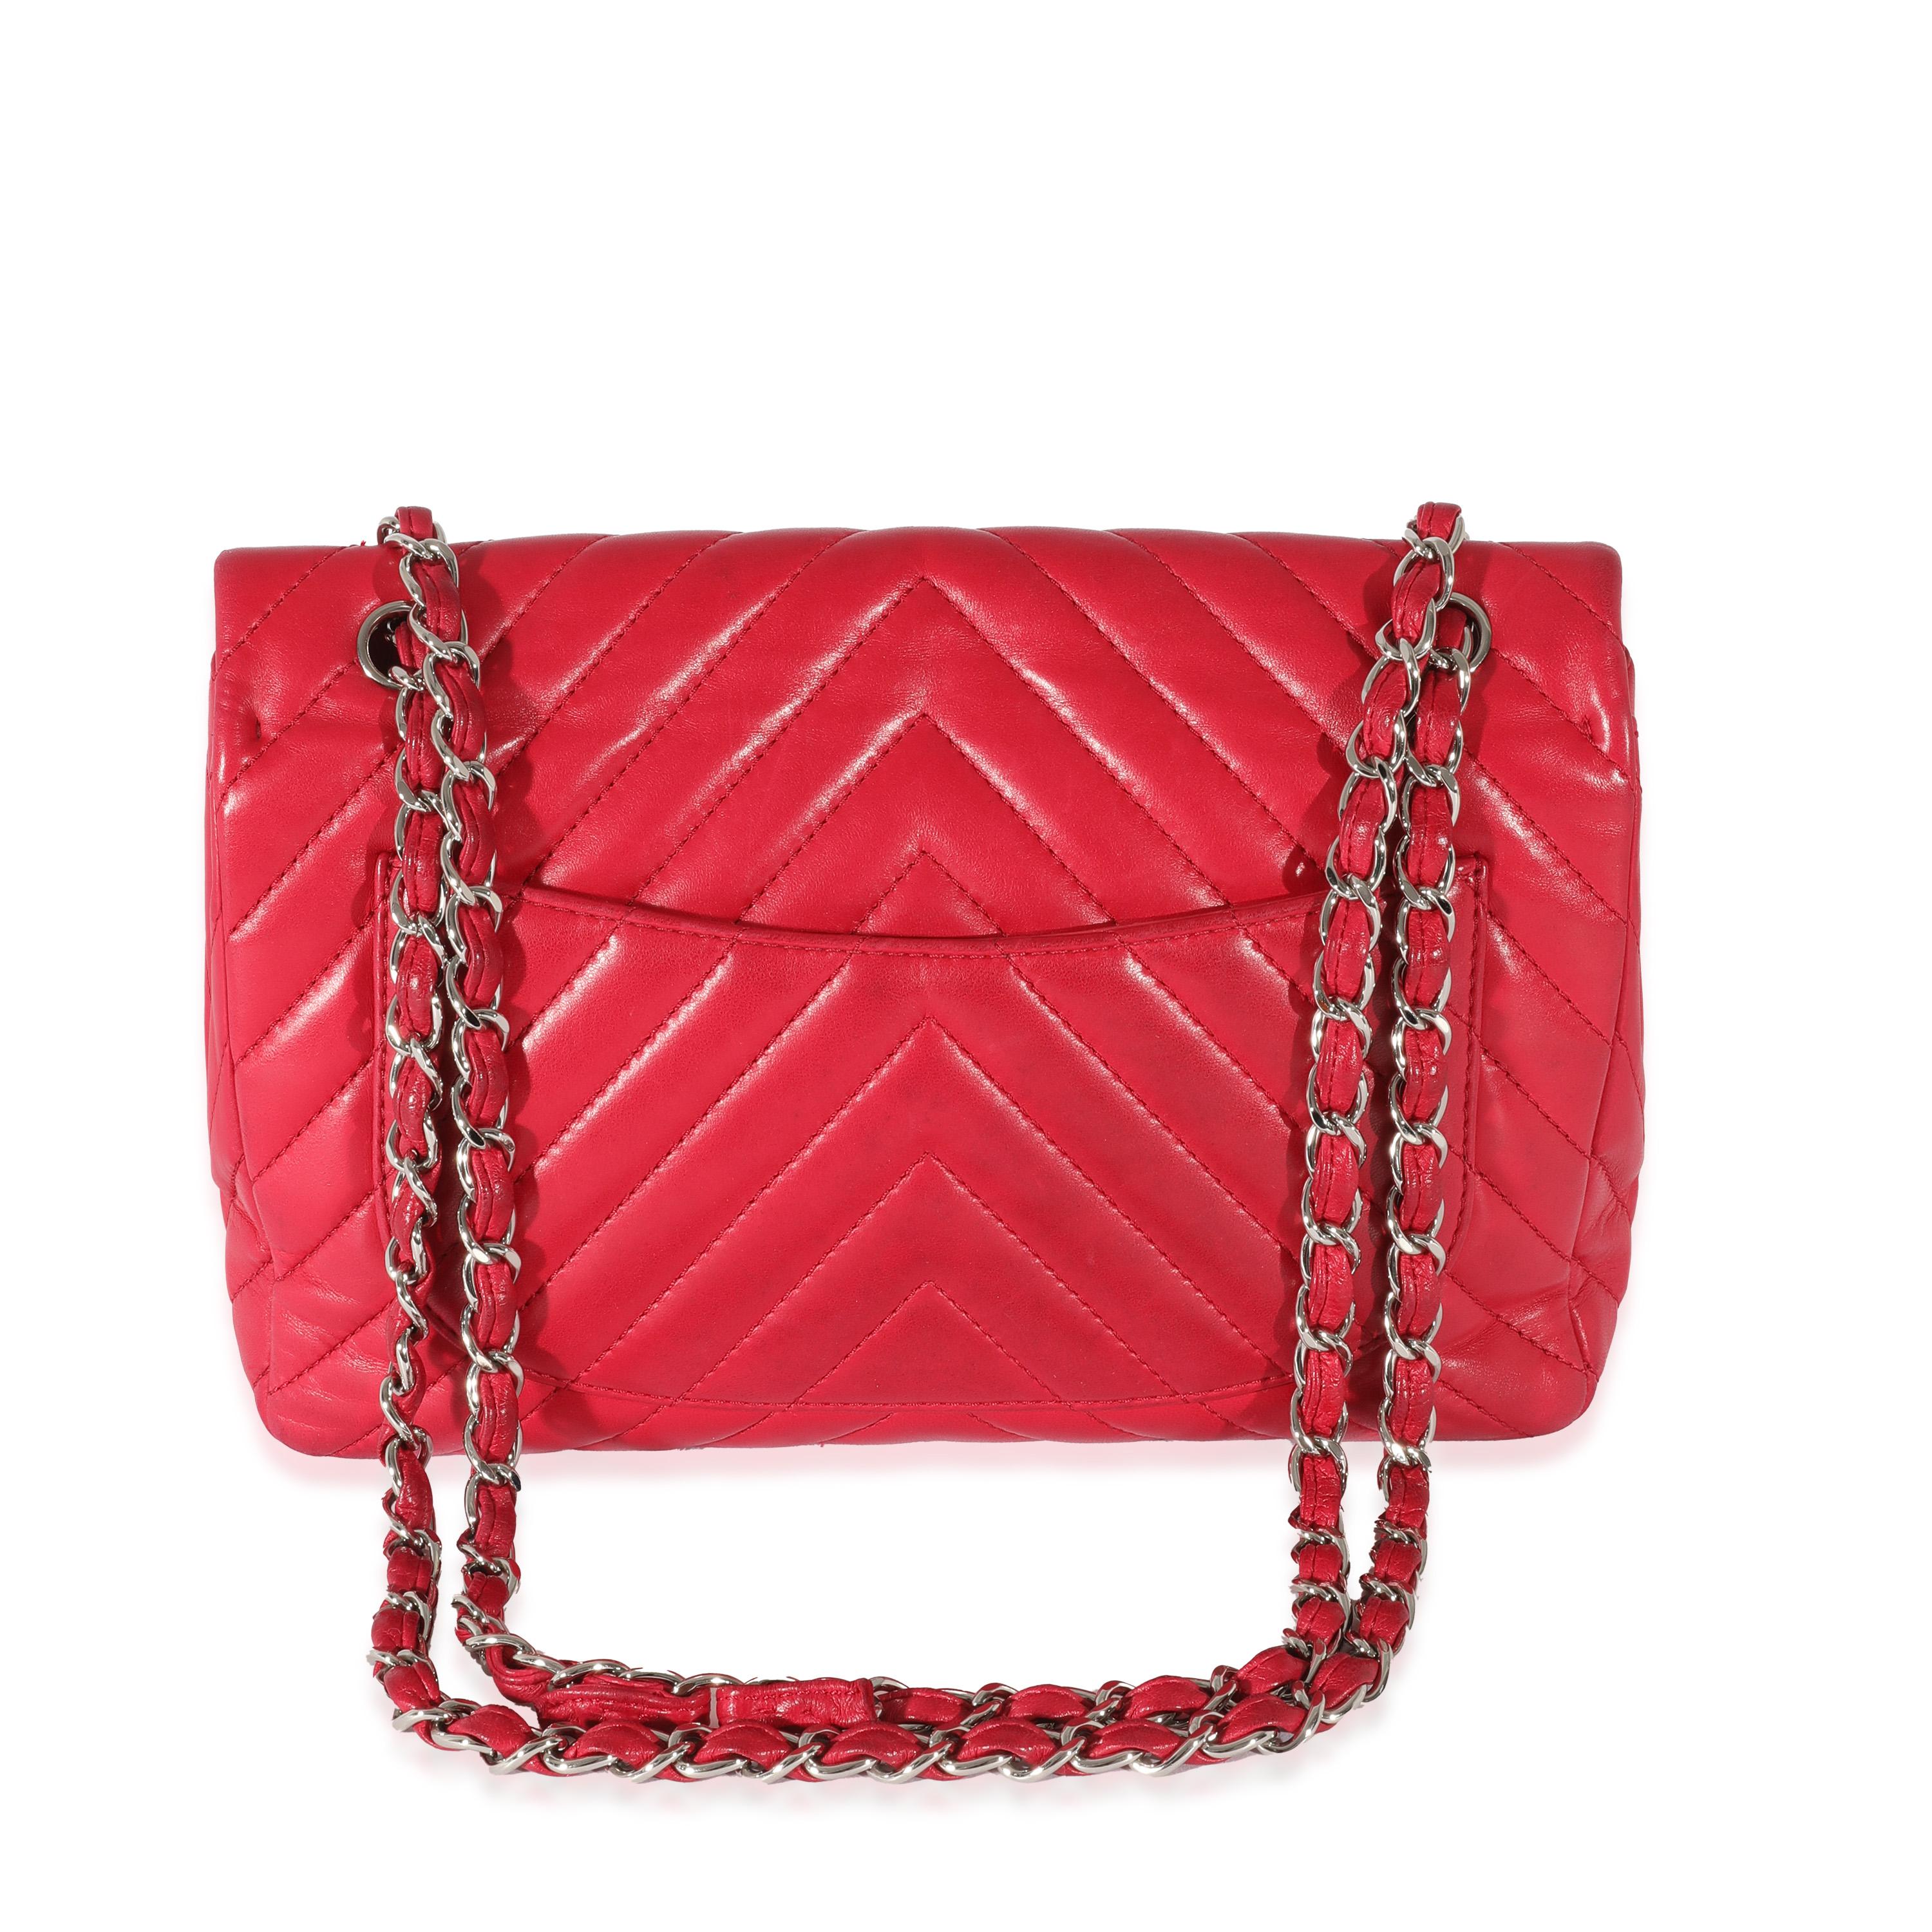 Chanel Pink Lambskin Chevron Jumbo Single Flap Bag In Excellent Condition For Sale In New York, NY